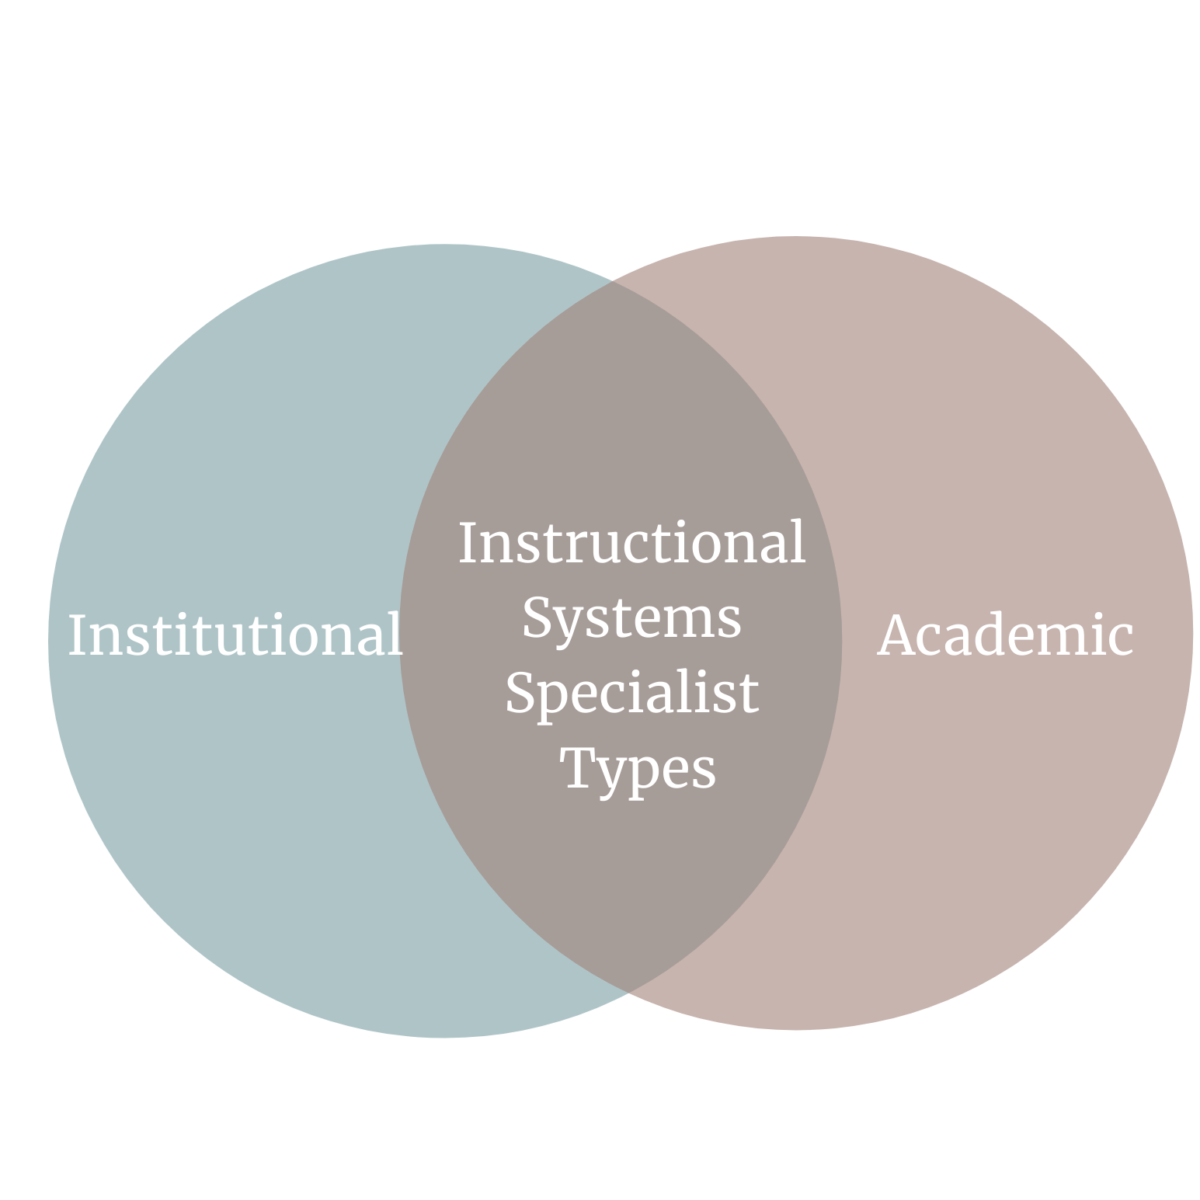 Institutional versus Academic Instructional Systems Specialist (ISS)